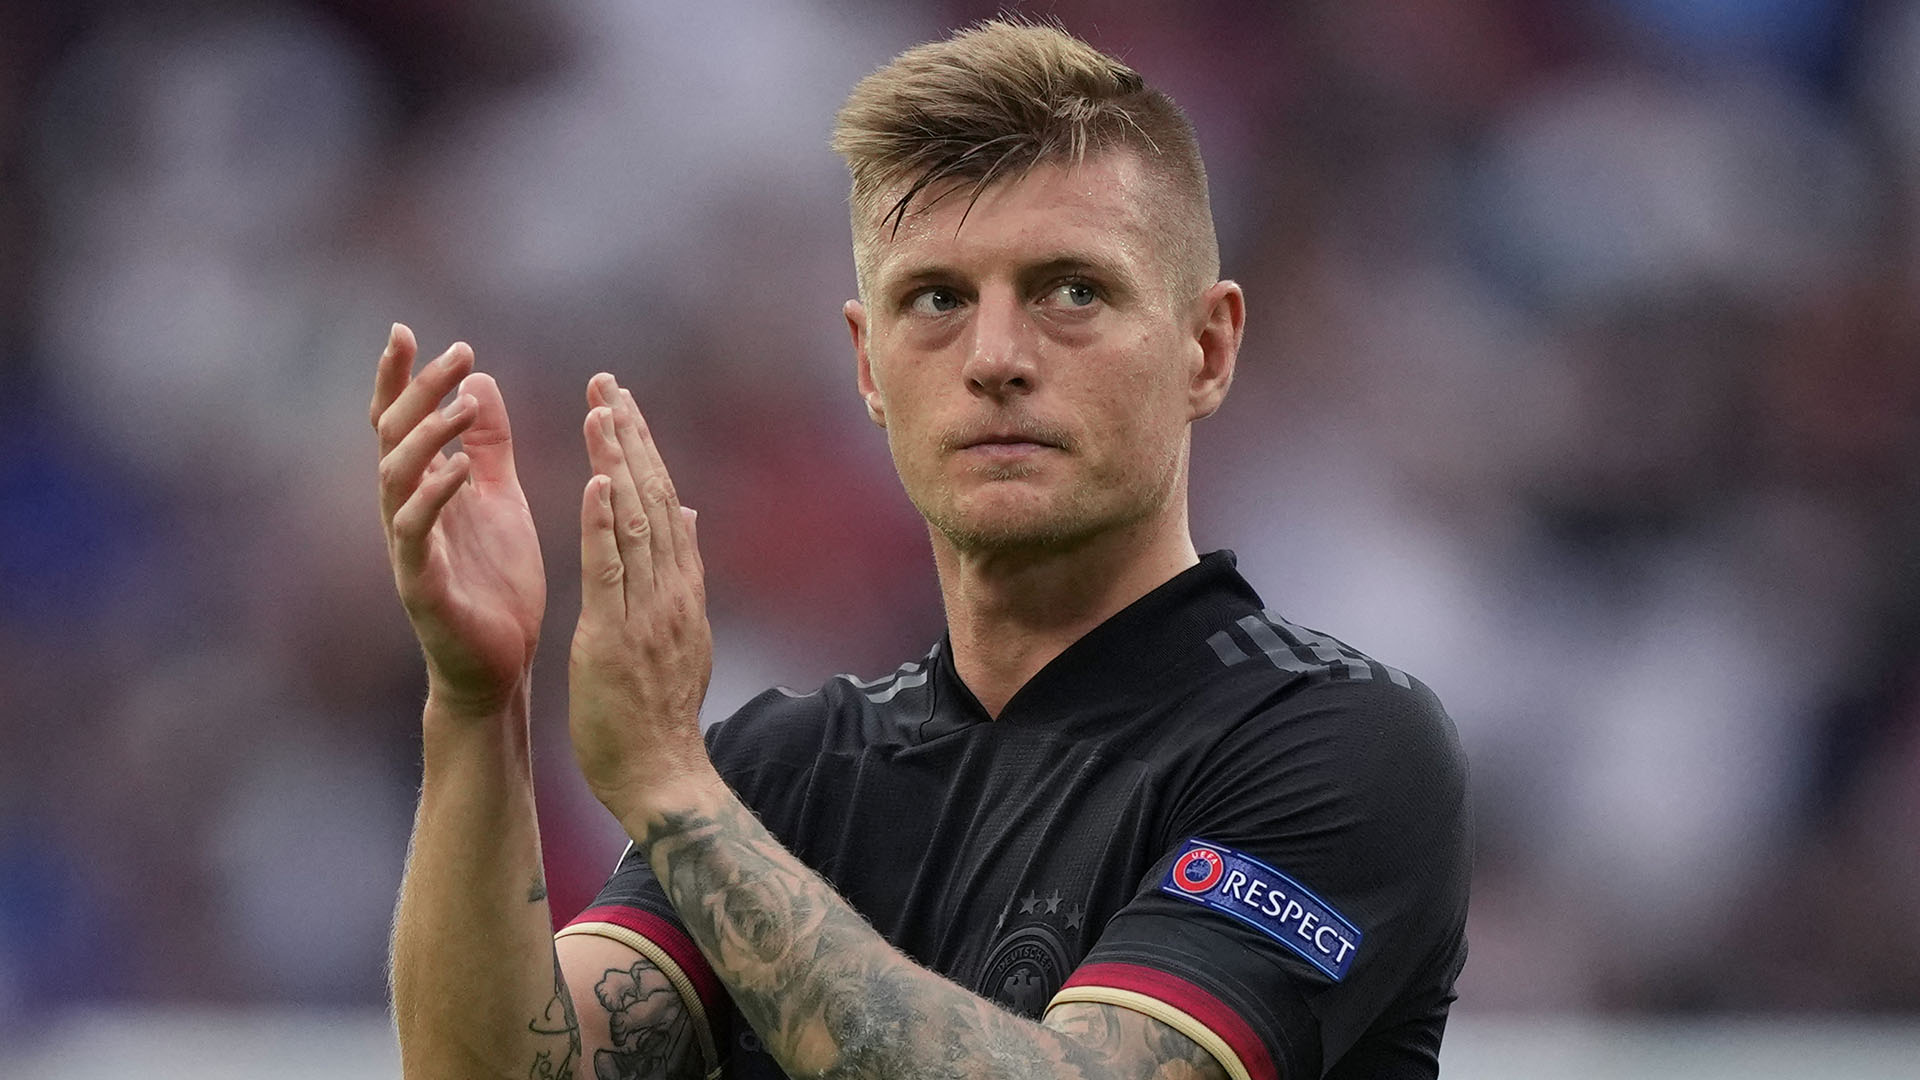 ‘I played through pain for six months’ – Real Madrid star Kroos opens up on road back from injury